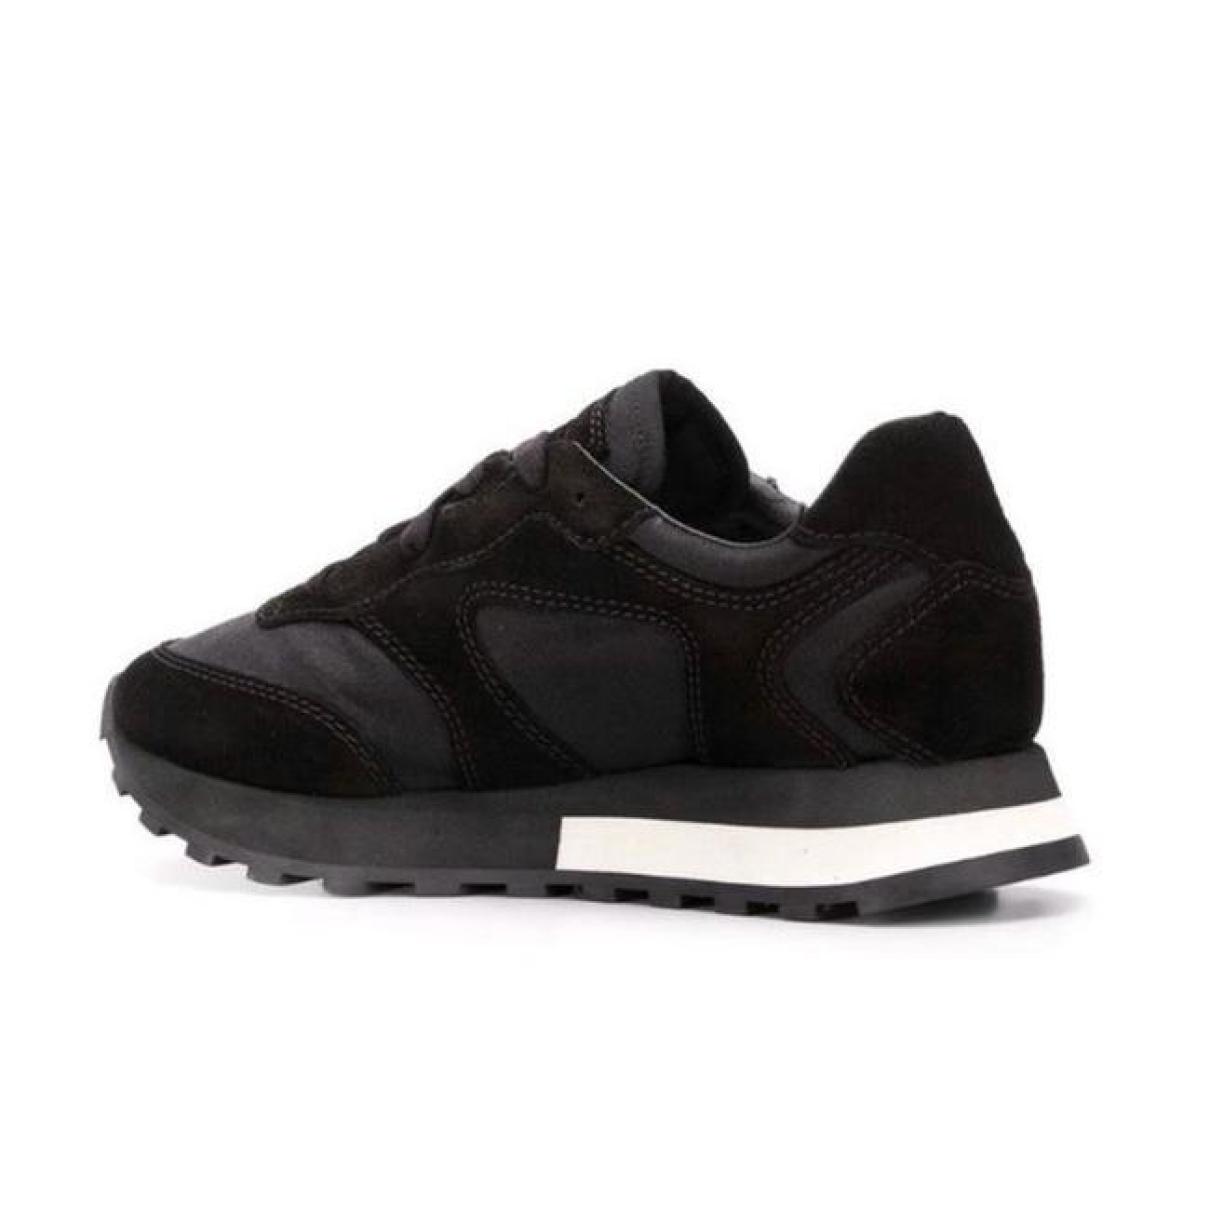 Runner leather trainers - 2